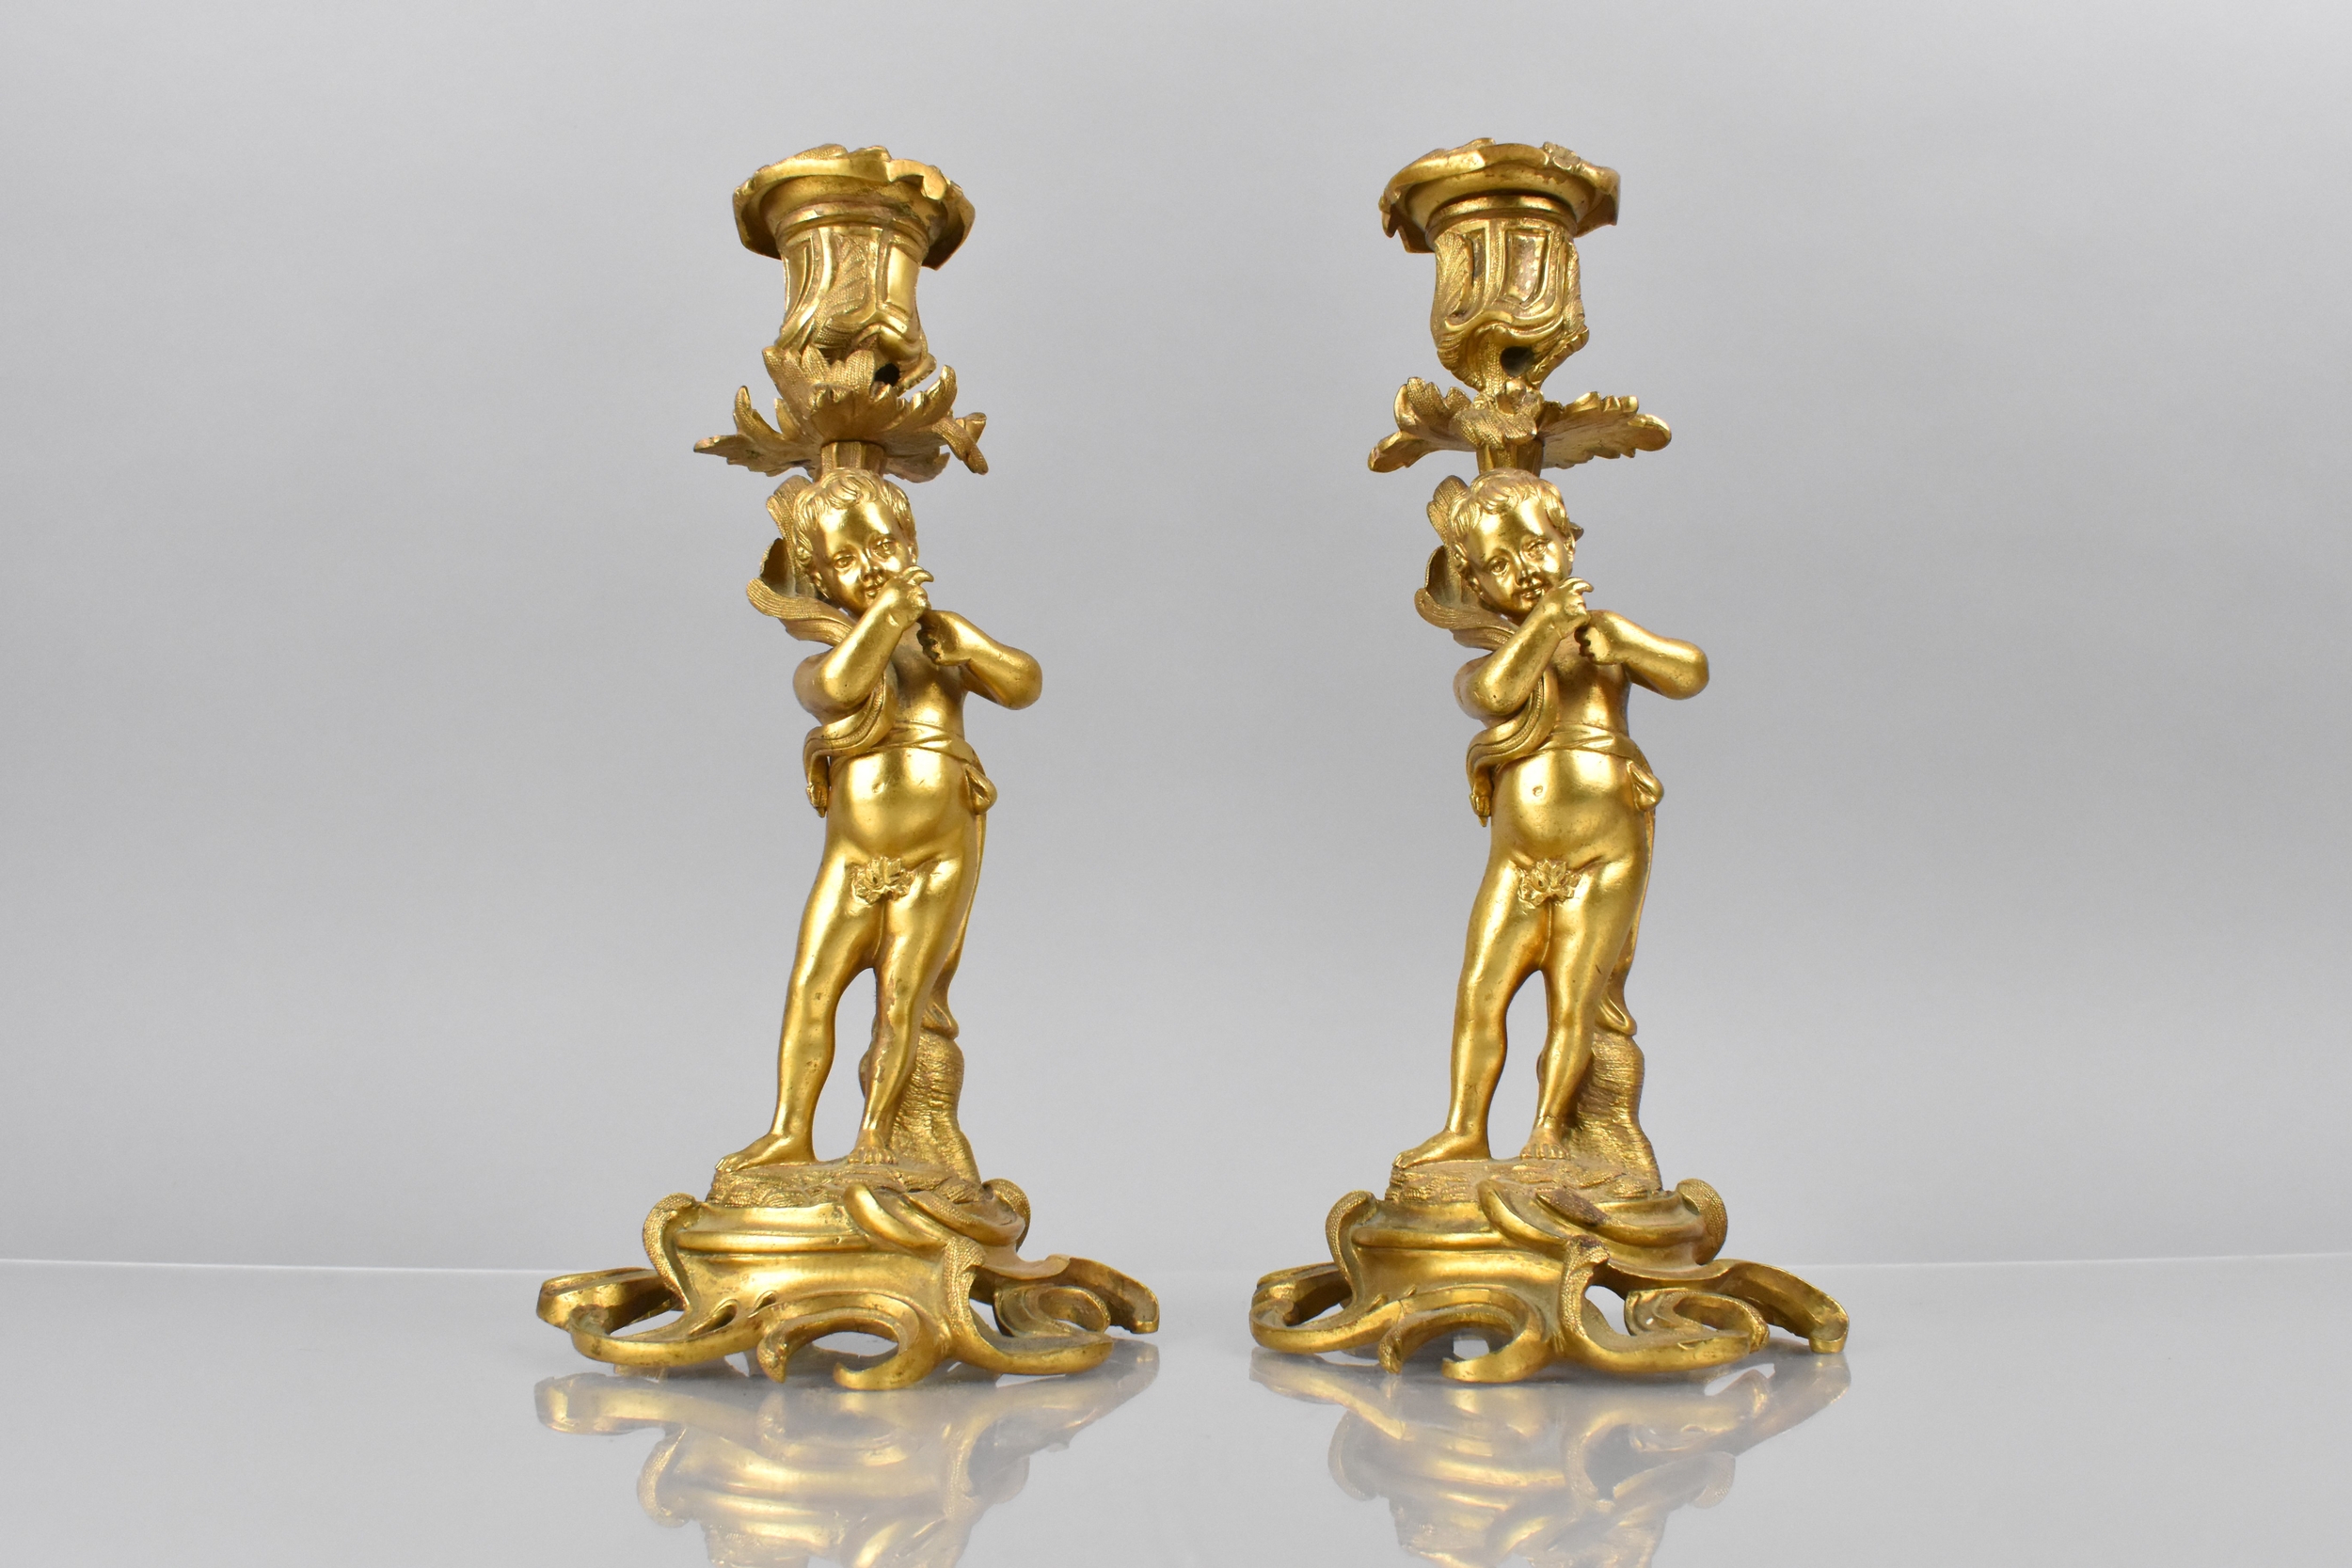 A Pair of 19th Century Gilt Bronze Candlesticks Modelled with Classical Cherubs Supporting - Image 2 of 4